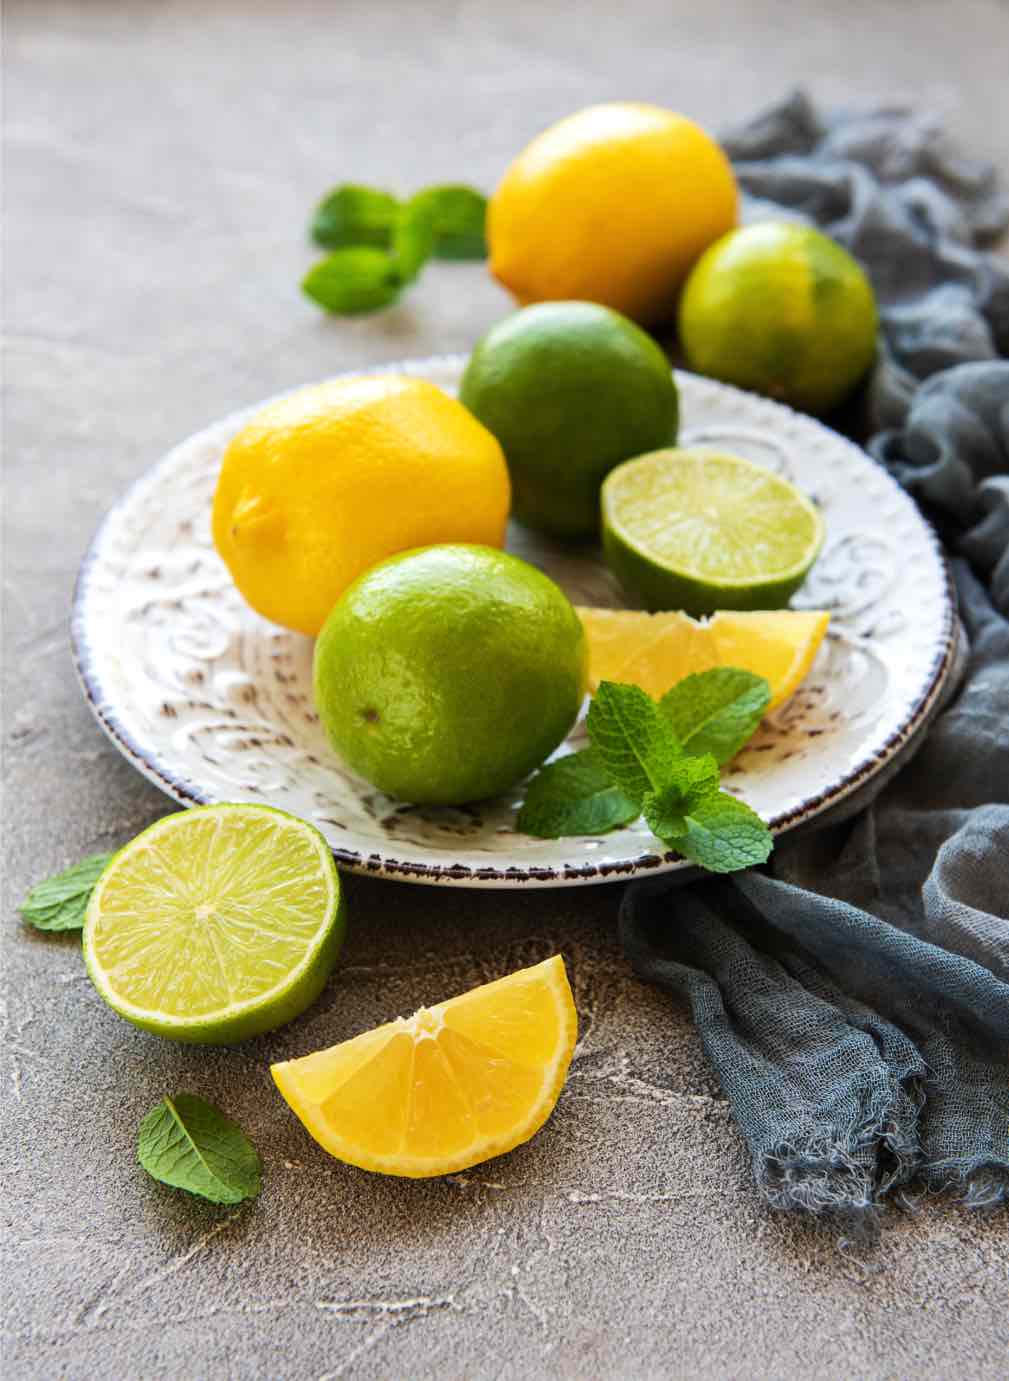 Lemons and limes are great for humans, but not for dogs - learn more with Dog Training Elite Emerald Coast in Pensacola!